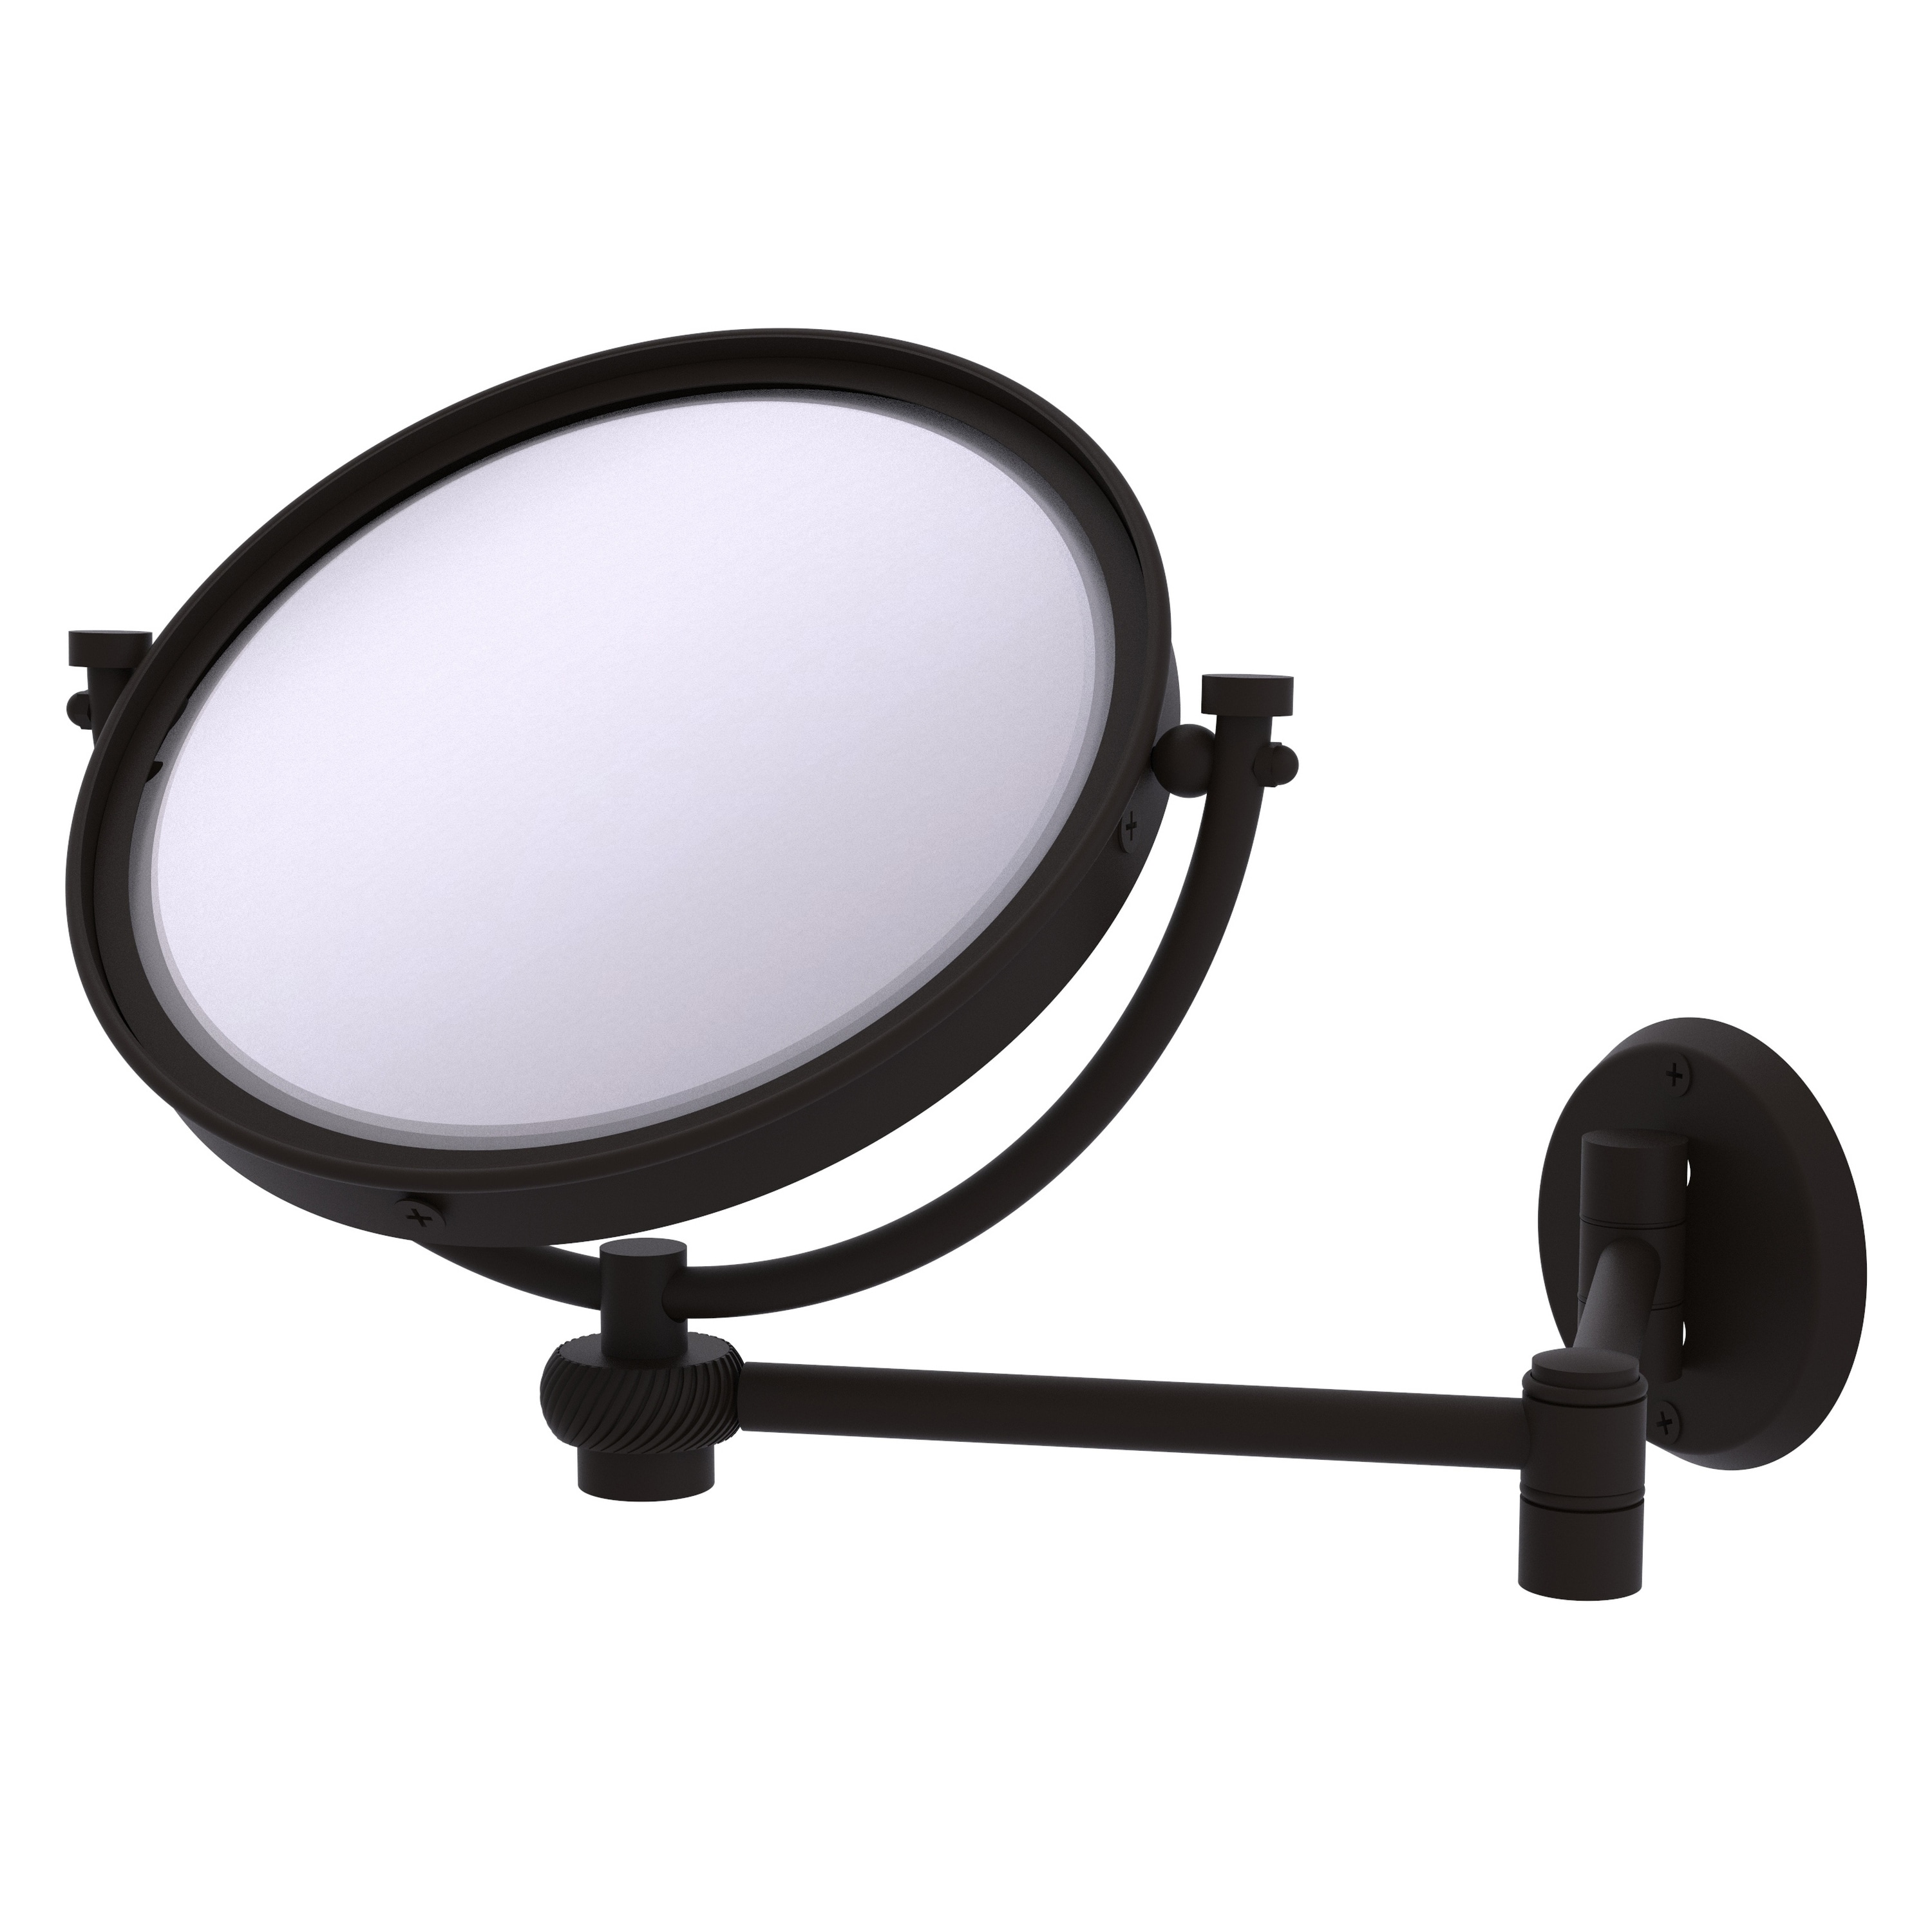 8-in x 10-in Oil-Rubbed Chrome Double-sided 3X Magnifying Wall-mounted Vanity Mirror | - Allied Brass WM-6T/3X-ORB